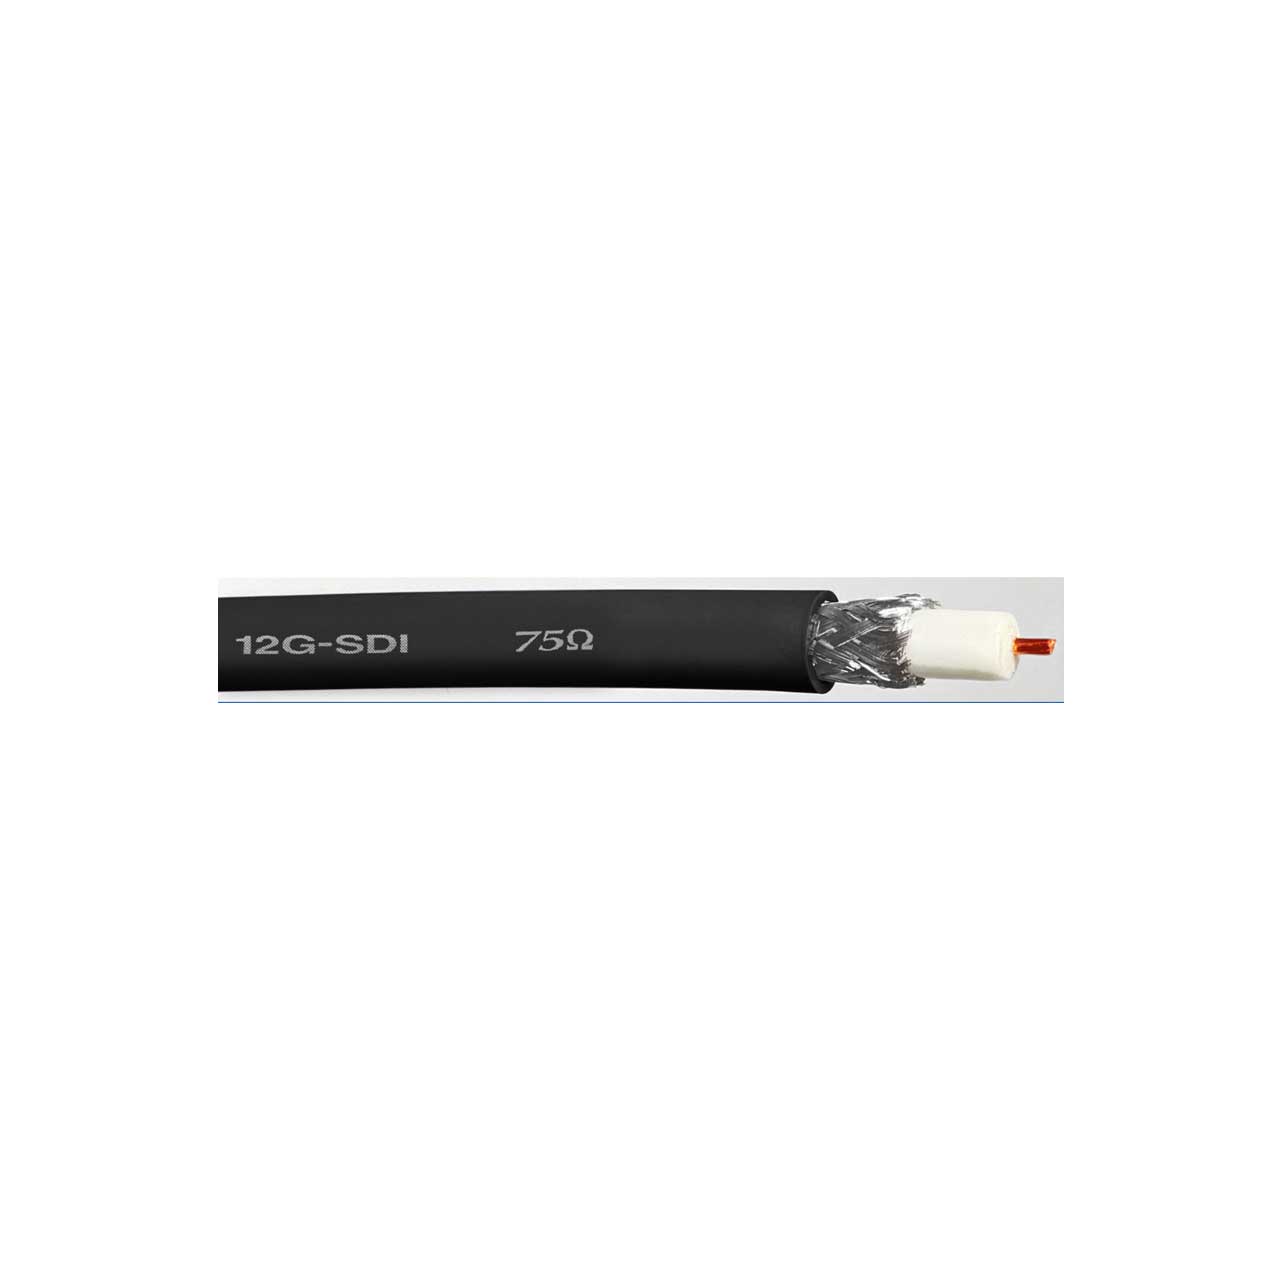 Canare L-5-5CUHWS 12G-SDI Mobile Flexible 75 Ohm Coaxial Cable - 984 Feet/300 Meters  L-5-5CUHWS